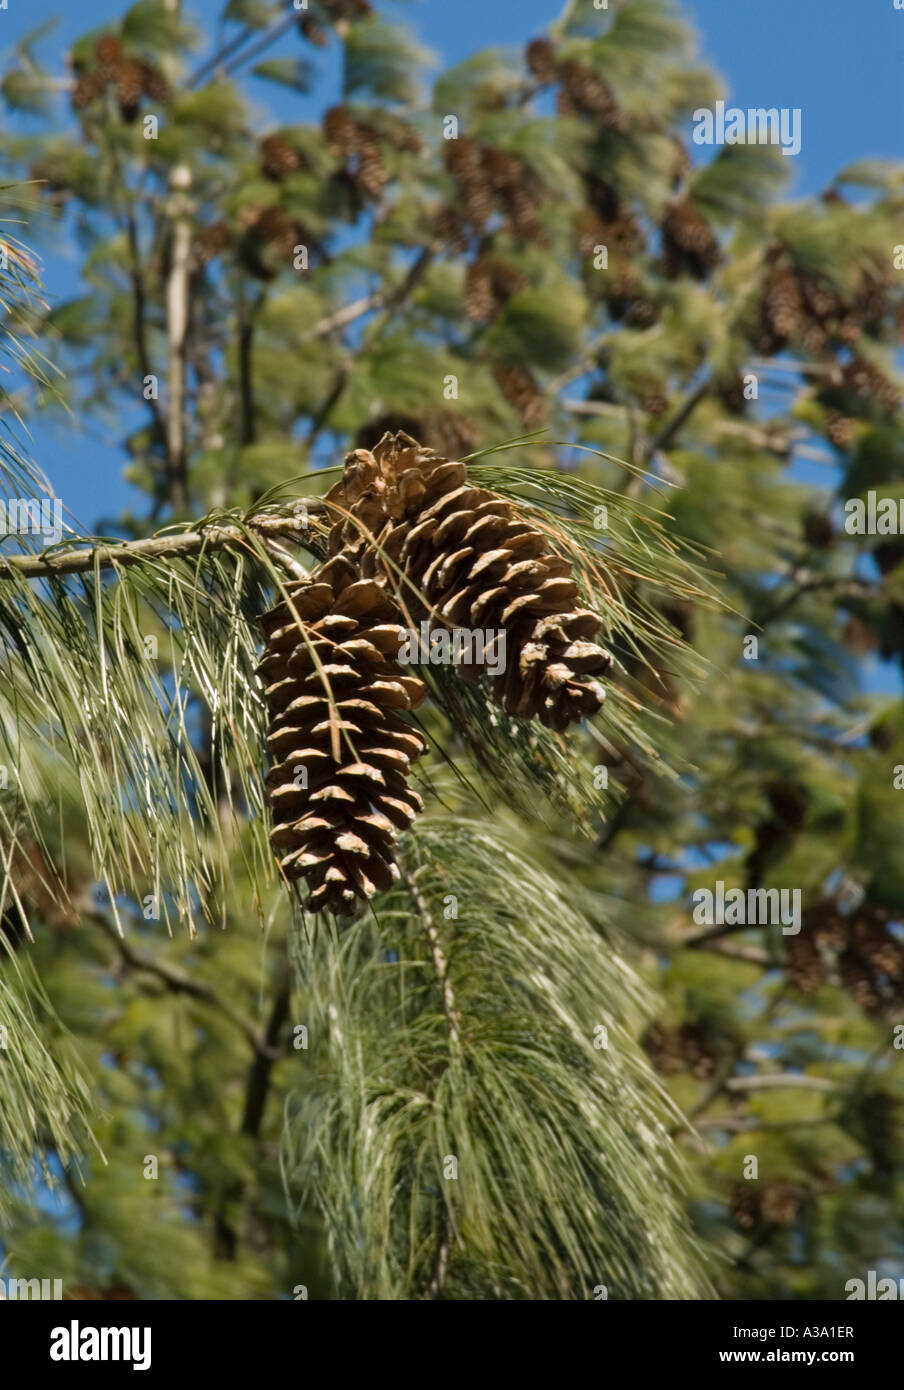 Pine Cones from Himalayan White Pine Tree Stock Photo